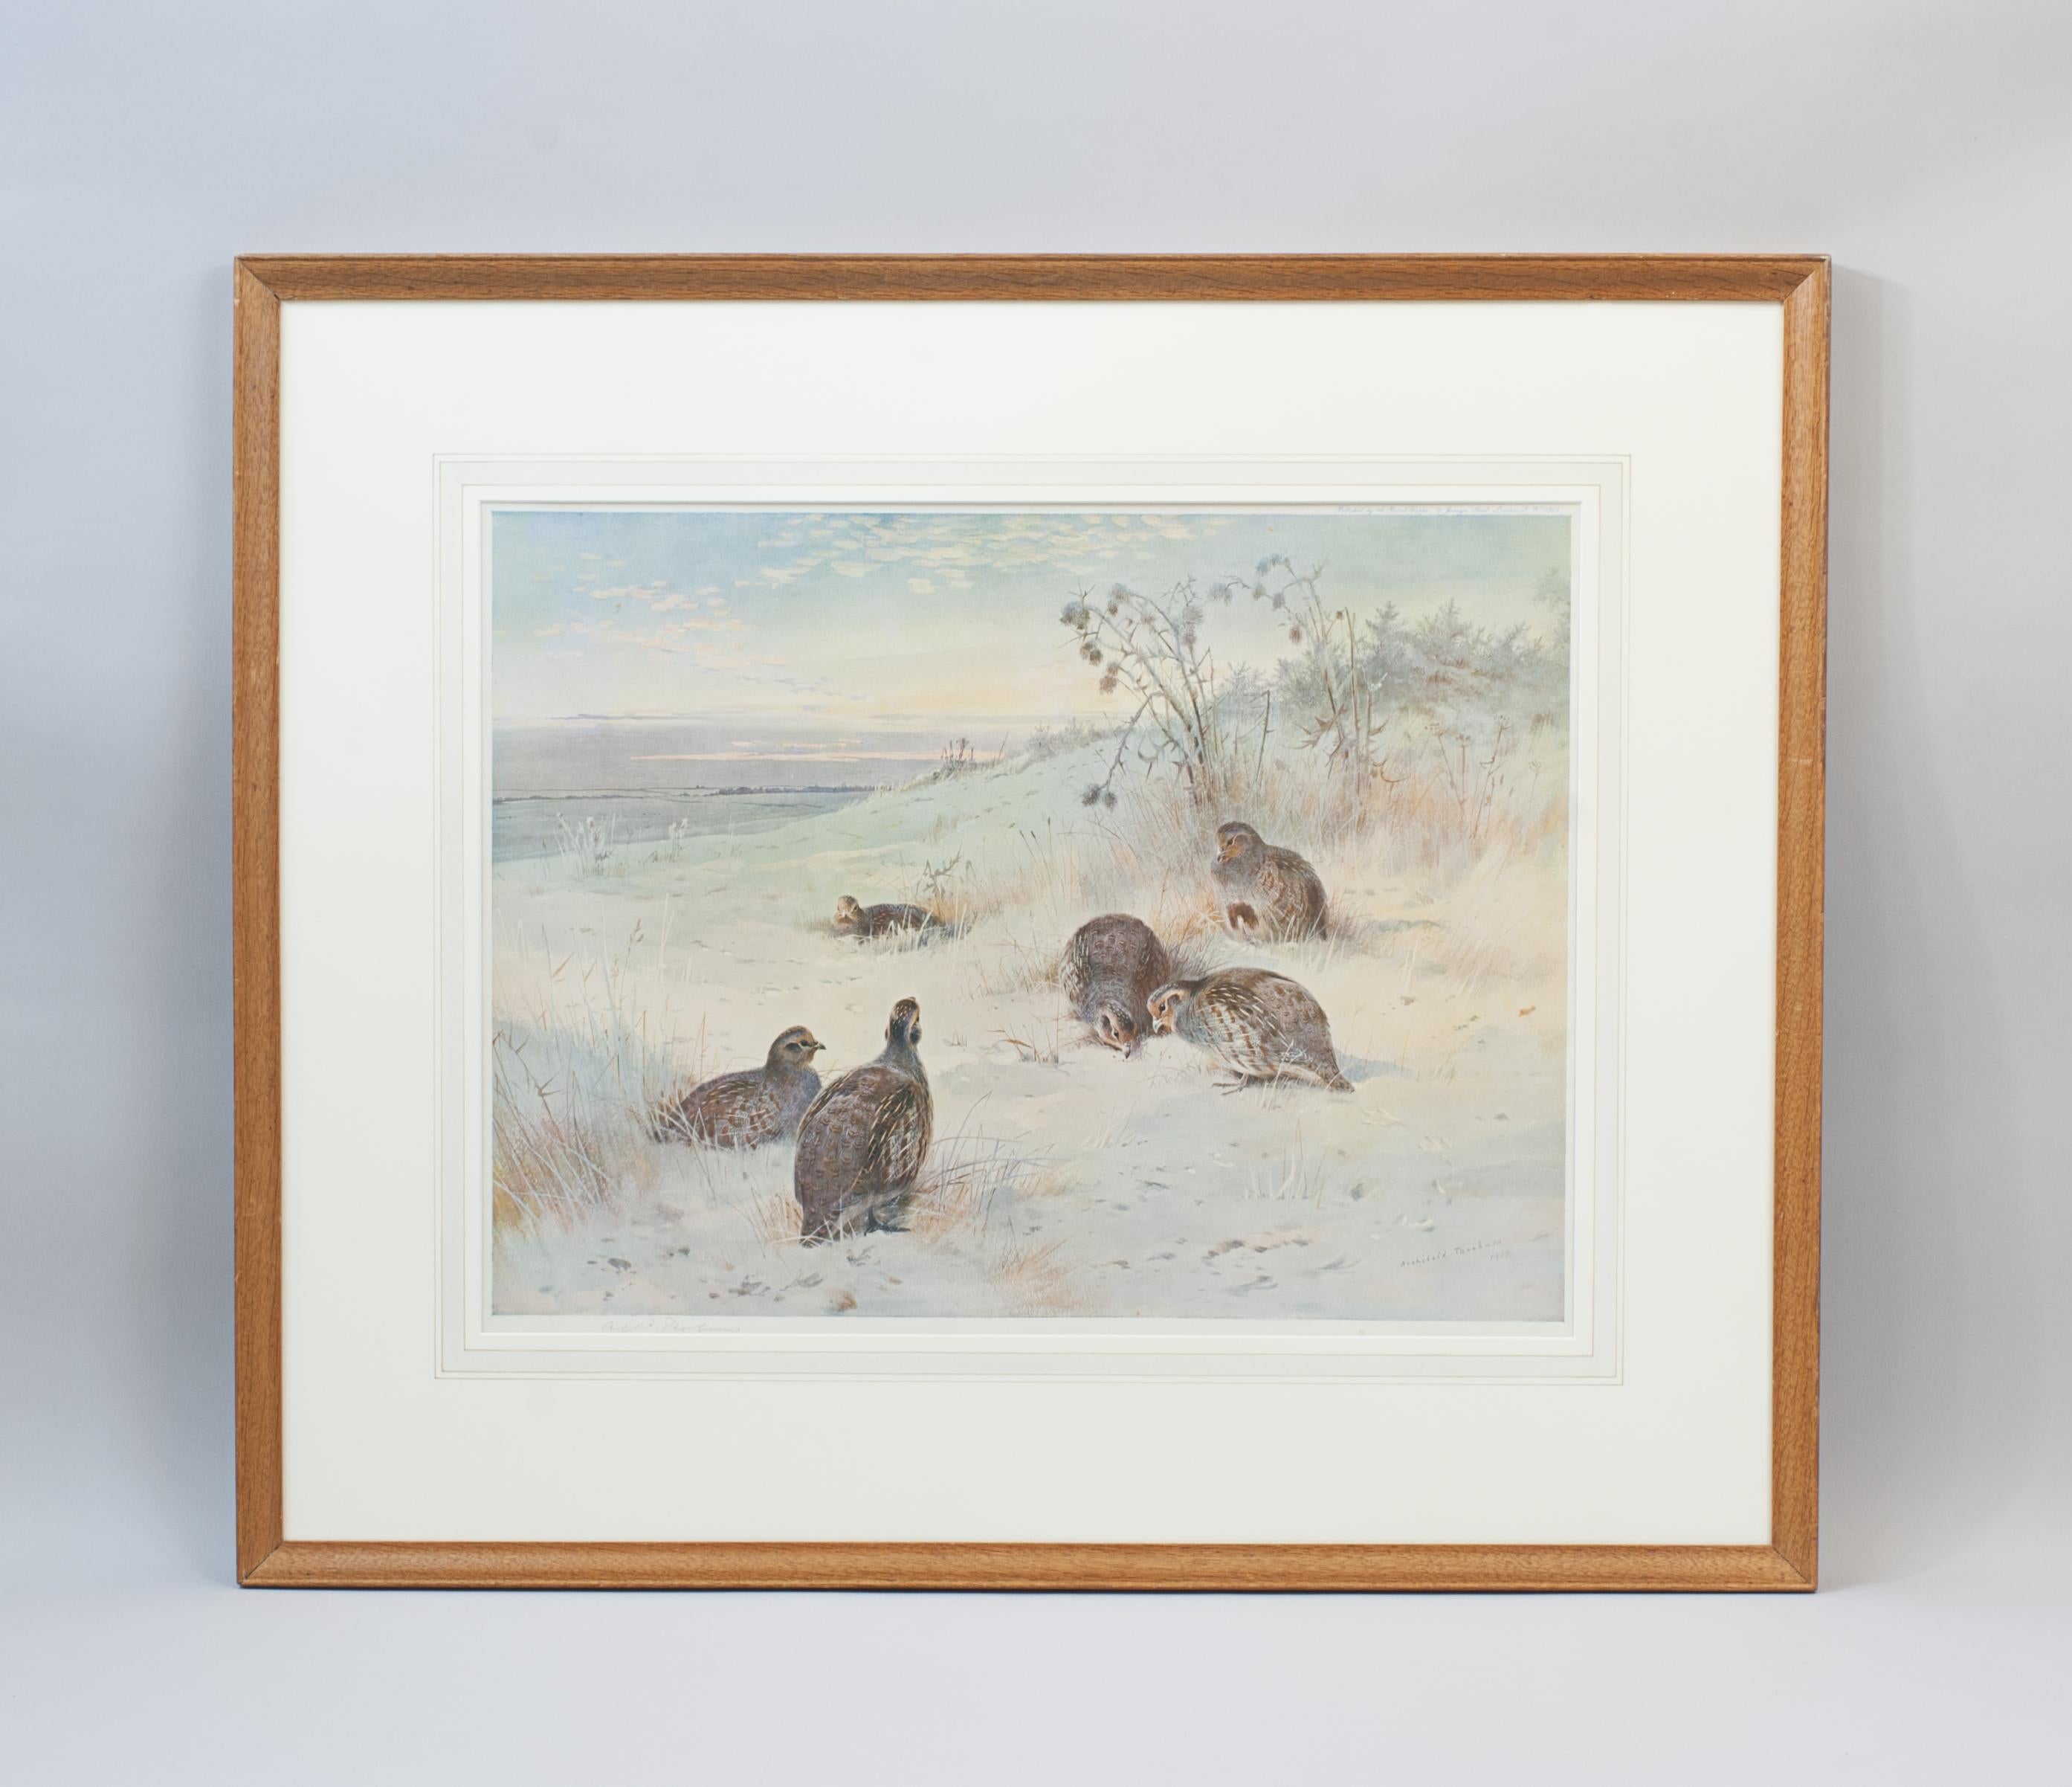 Signed Game Bird Print By Archibald Thorburn.
A game bird colotype print by Archibald Thorburn. The picture is in an old period oak frame and signed in pencil by the artist, published by A. Baird - Carter, 70 Jermyn Street, London,